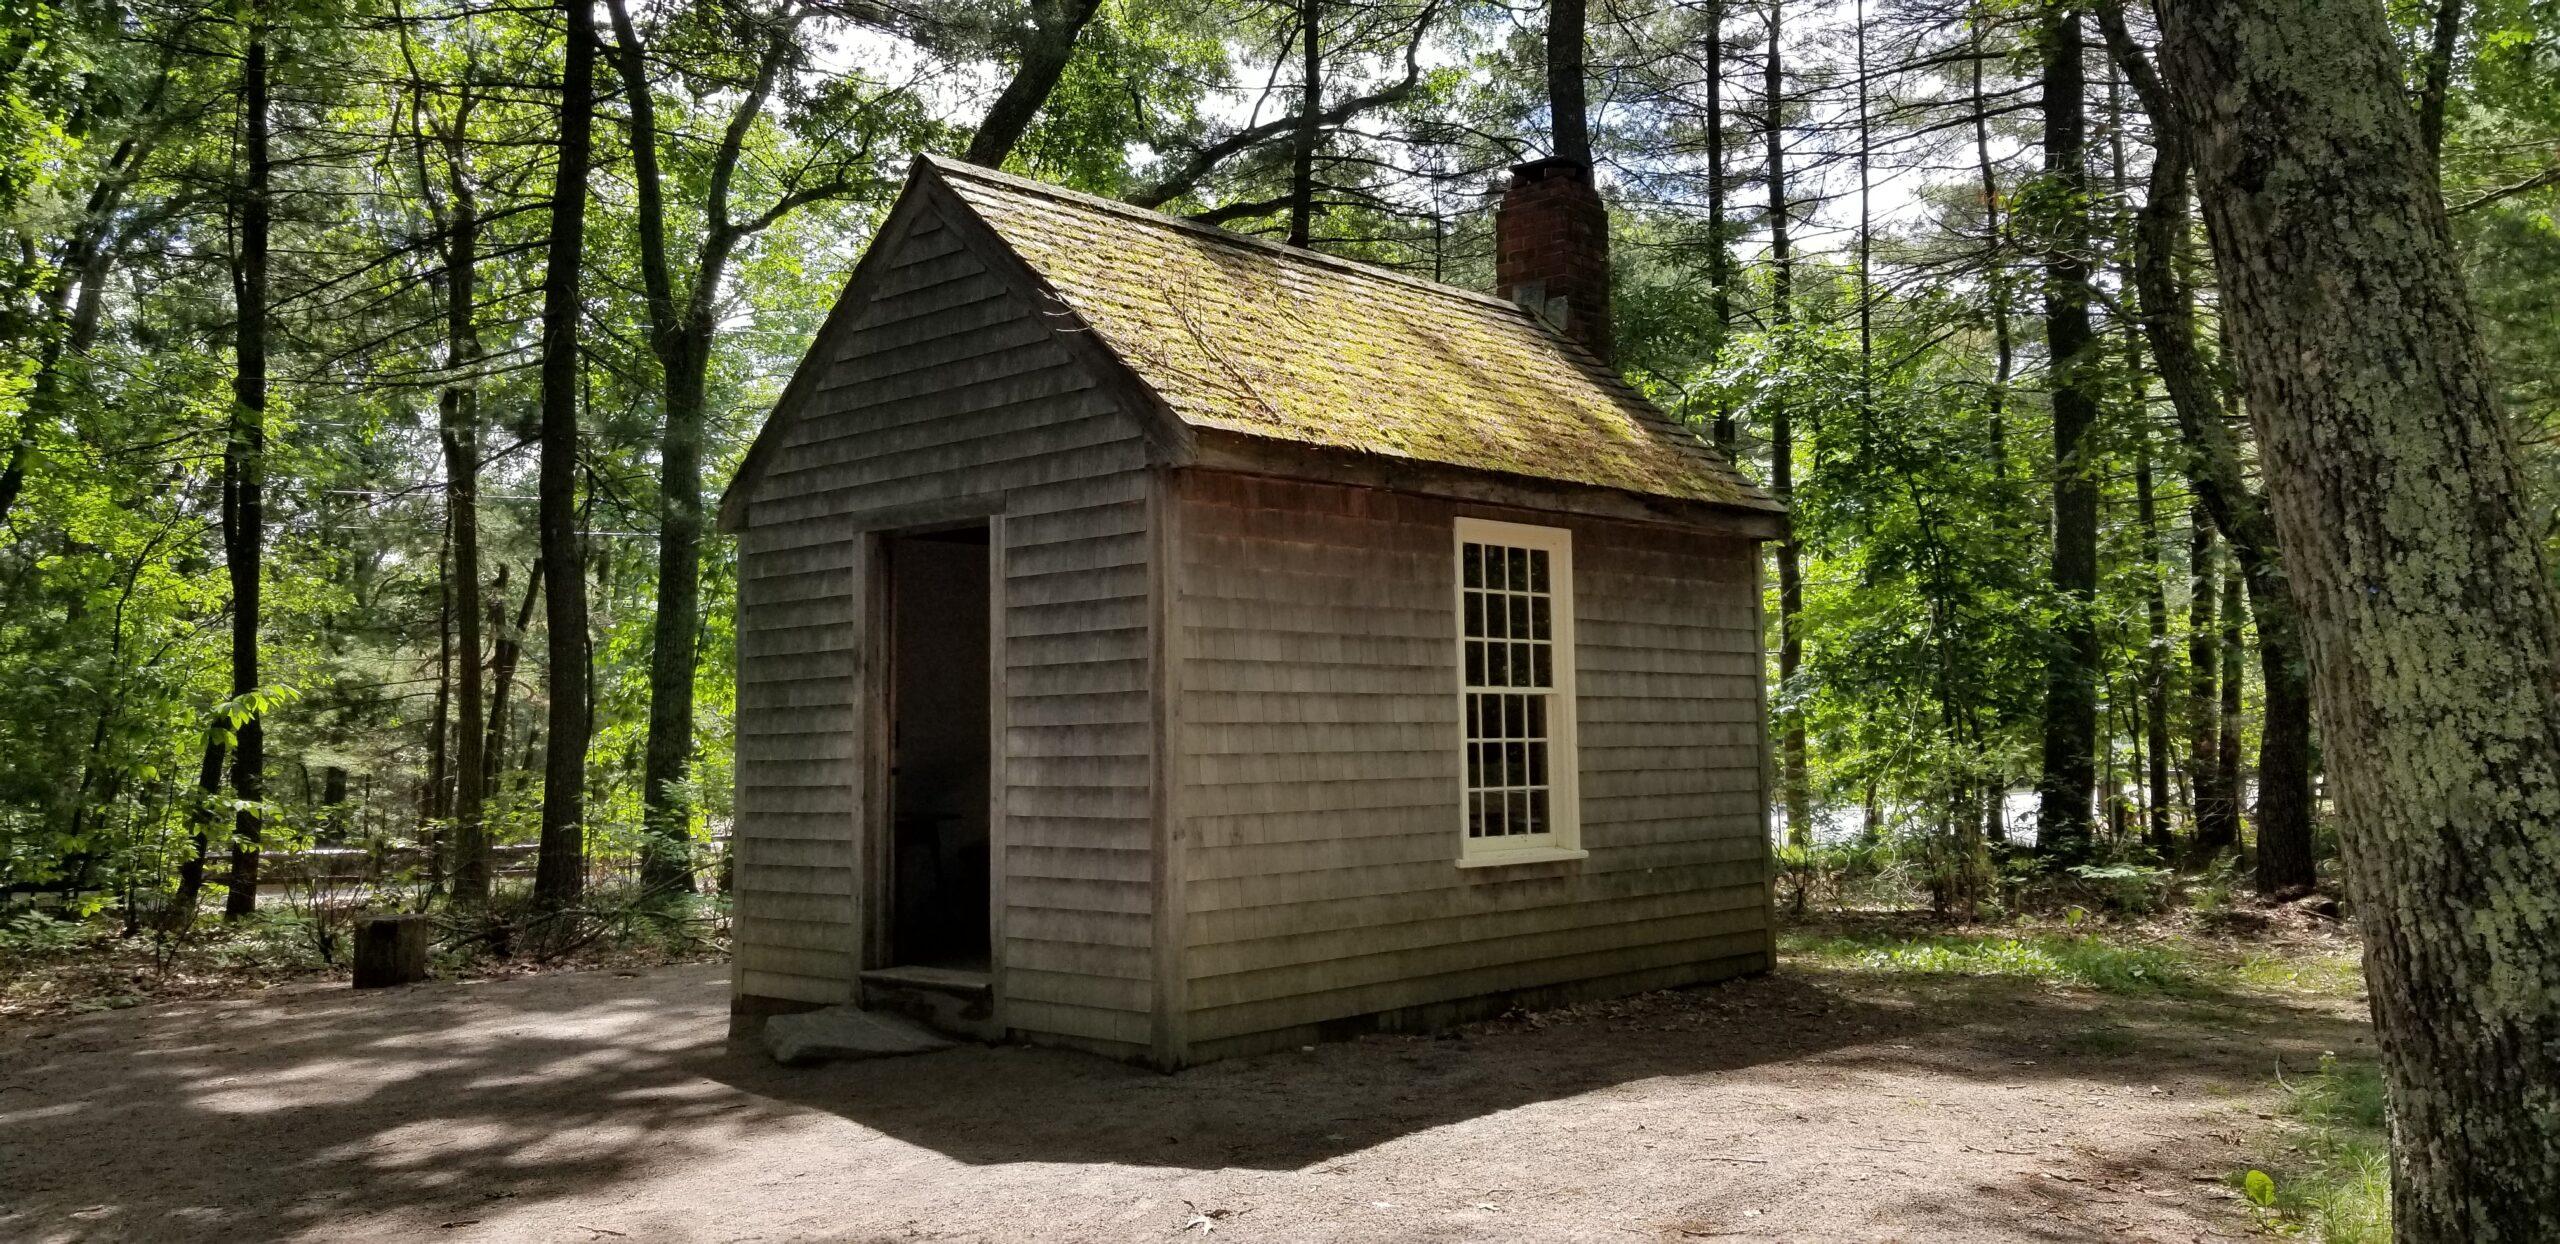 The re-created cabin of Henry David Thoreau at Walden Pond.